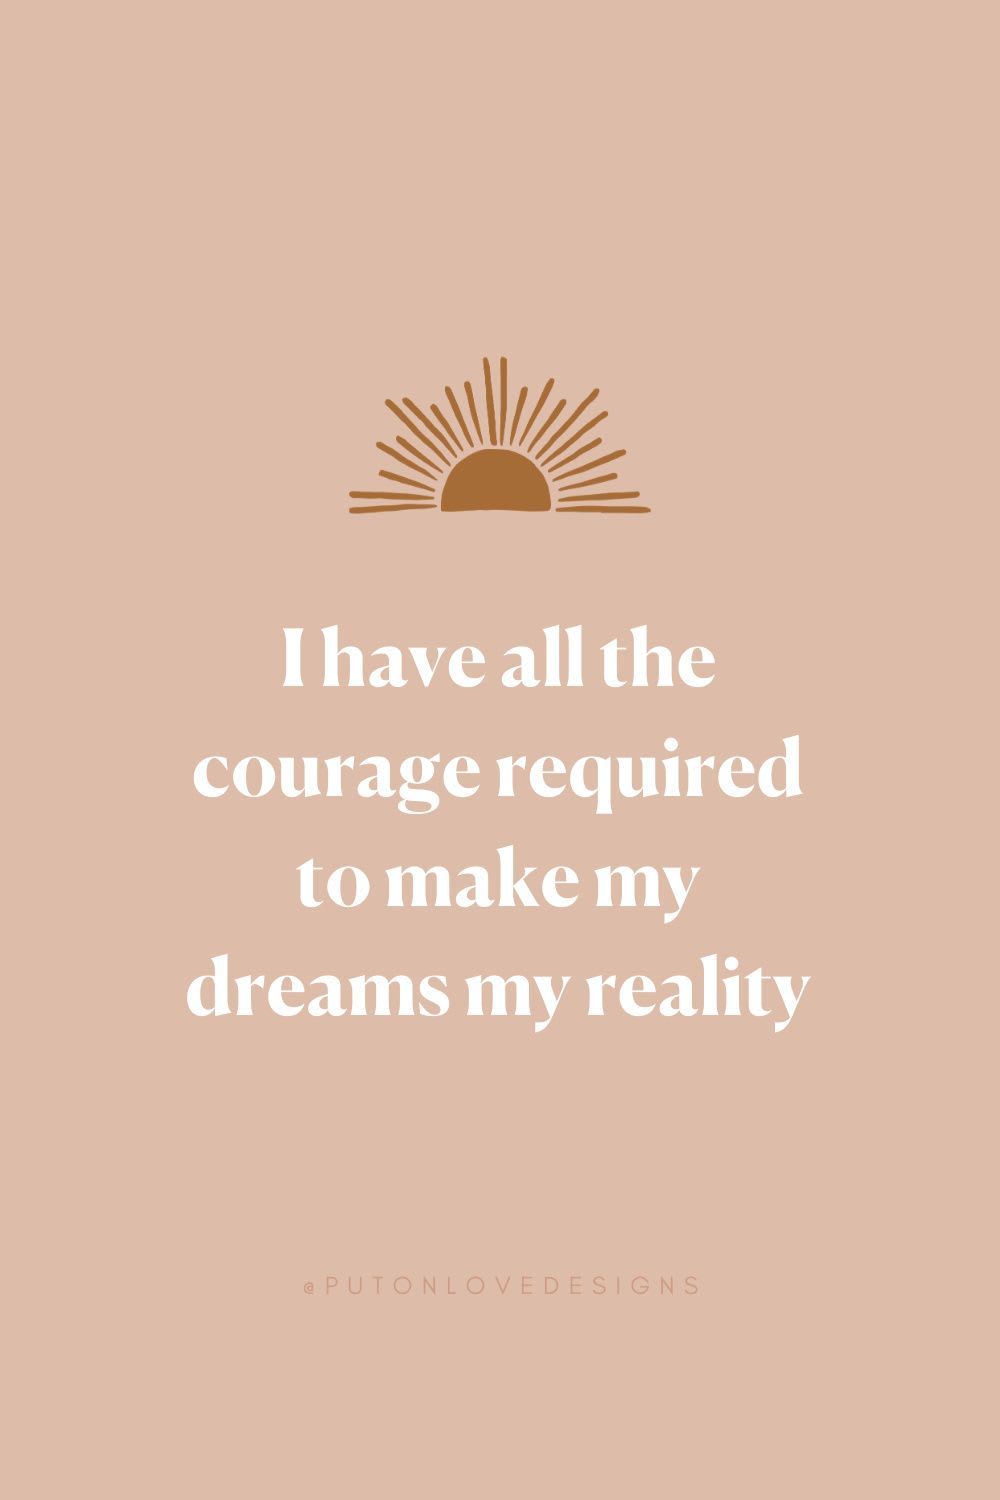 Affirmation for Self Confidence